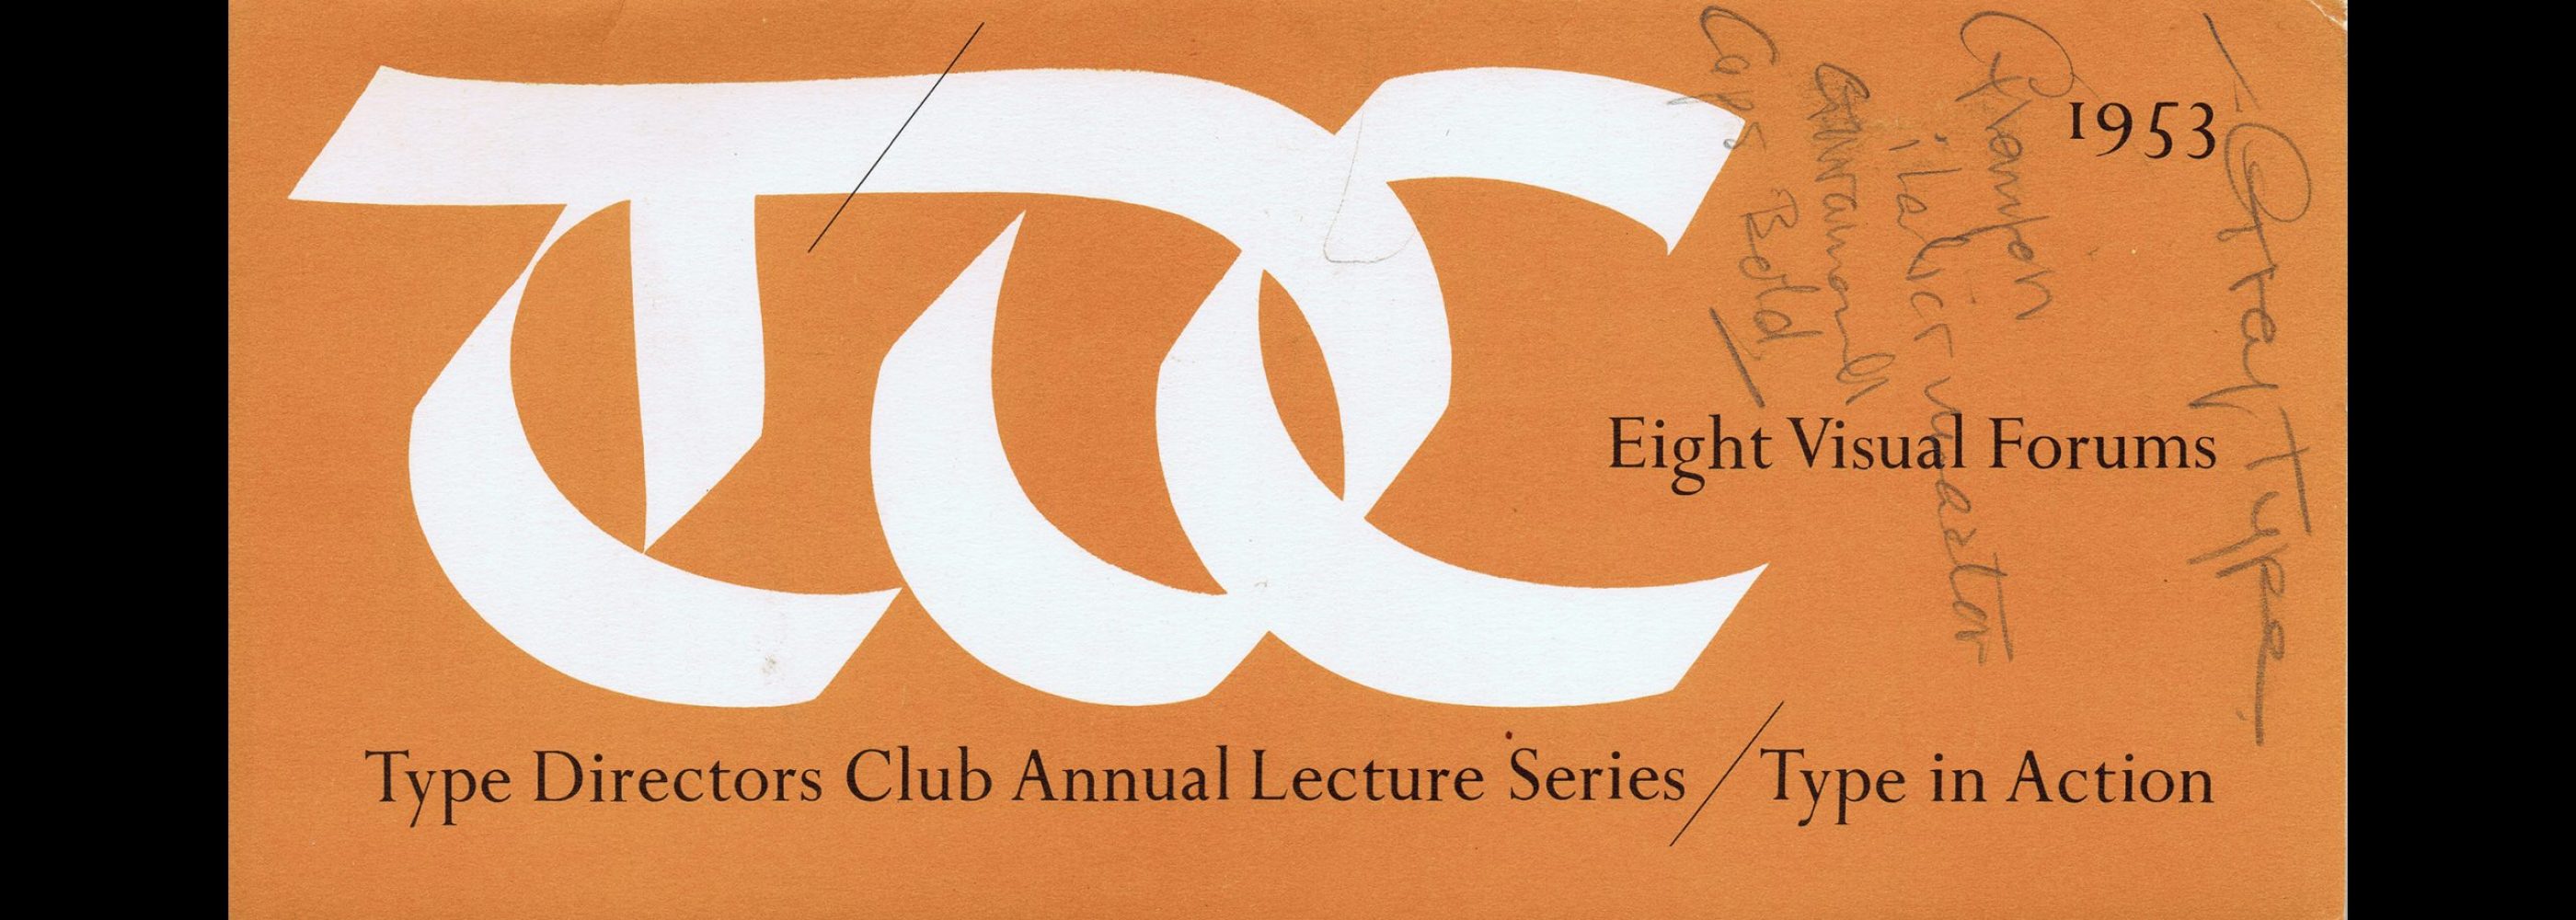 Type Directors Club Annual Lecture Series : Type in Action, Eight Visual Forums, 1953. Designed by Freeman Craw